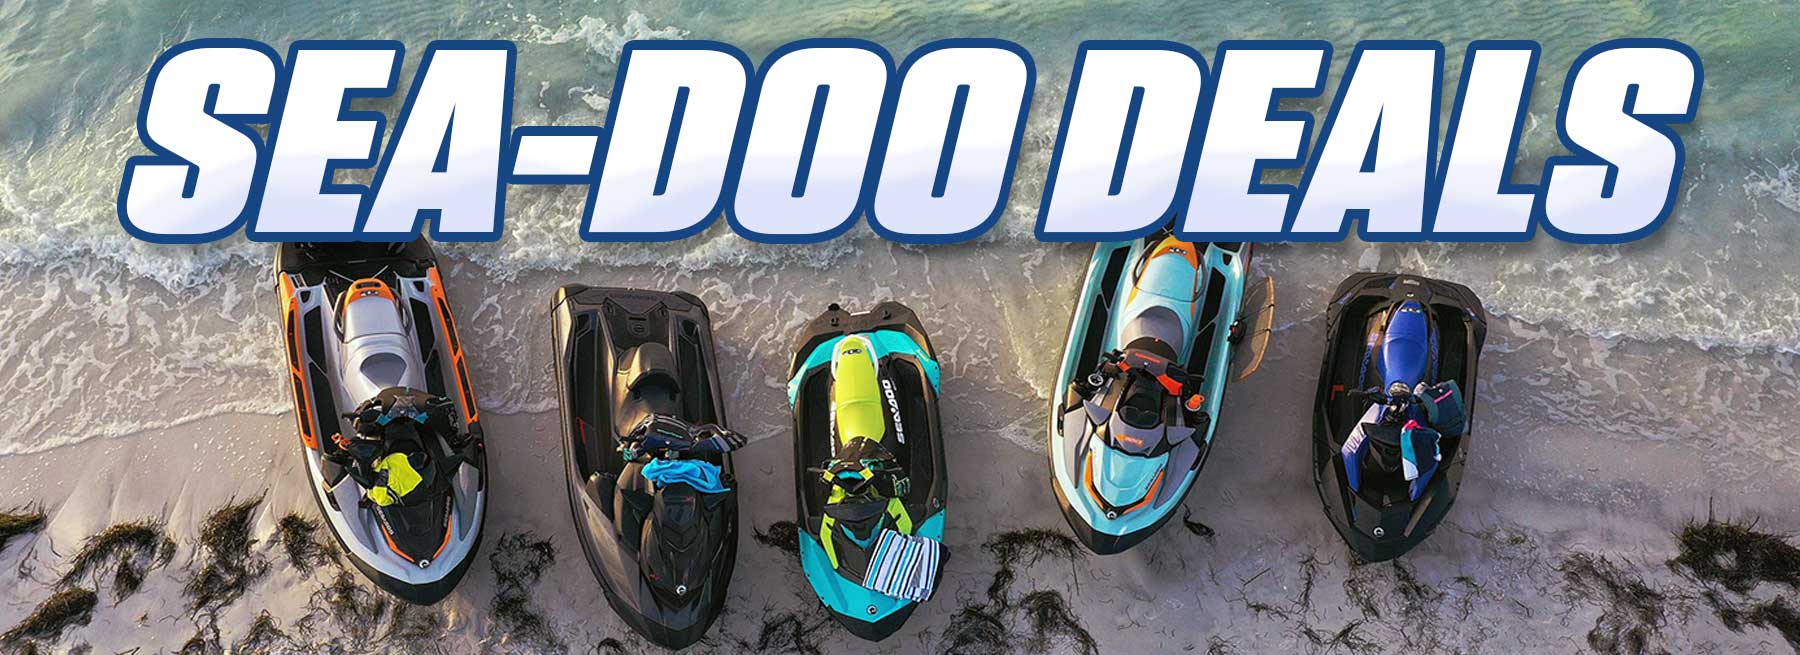 Sea-Doo and Jetski sale deals for personal watercraft, jetski and waverunners nearby Chicago, IL